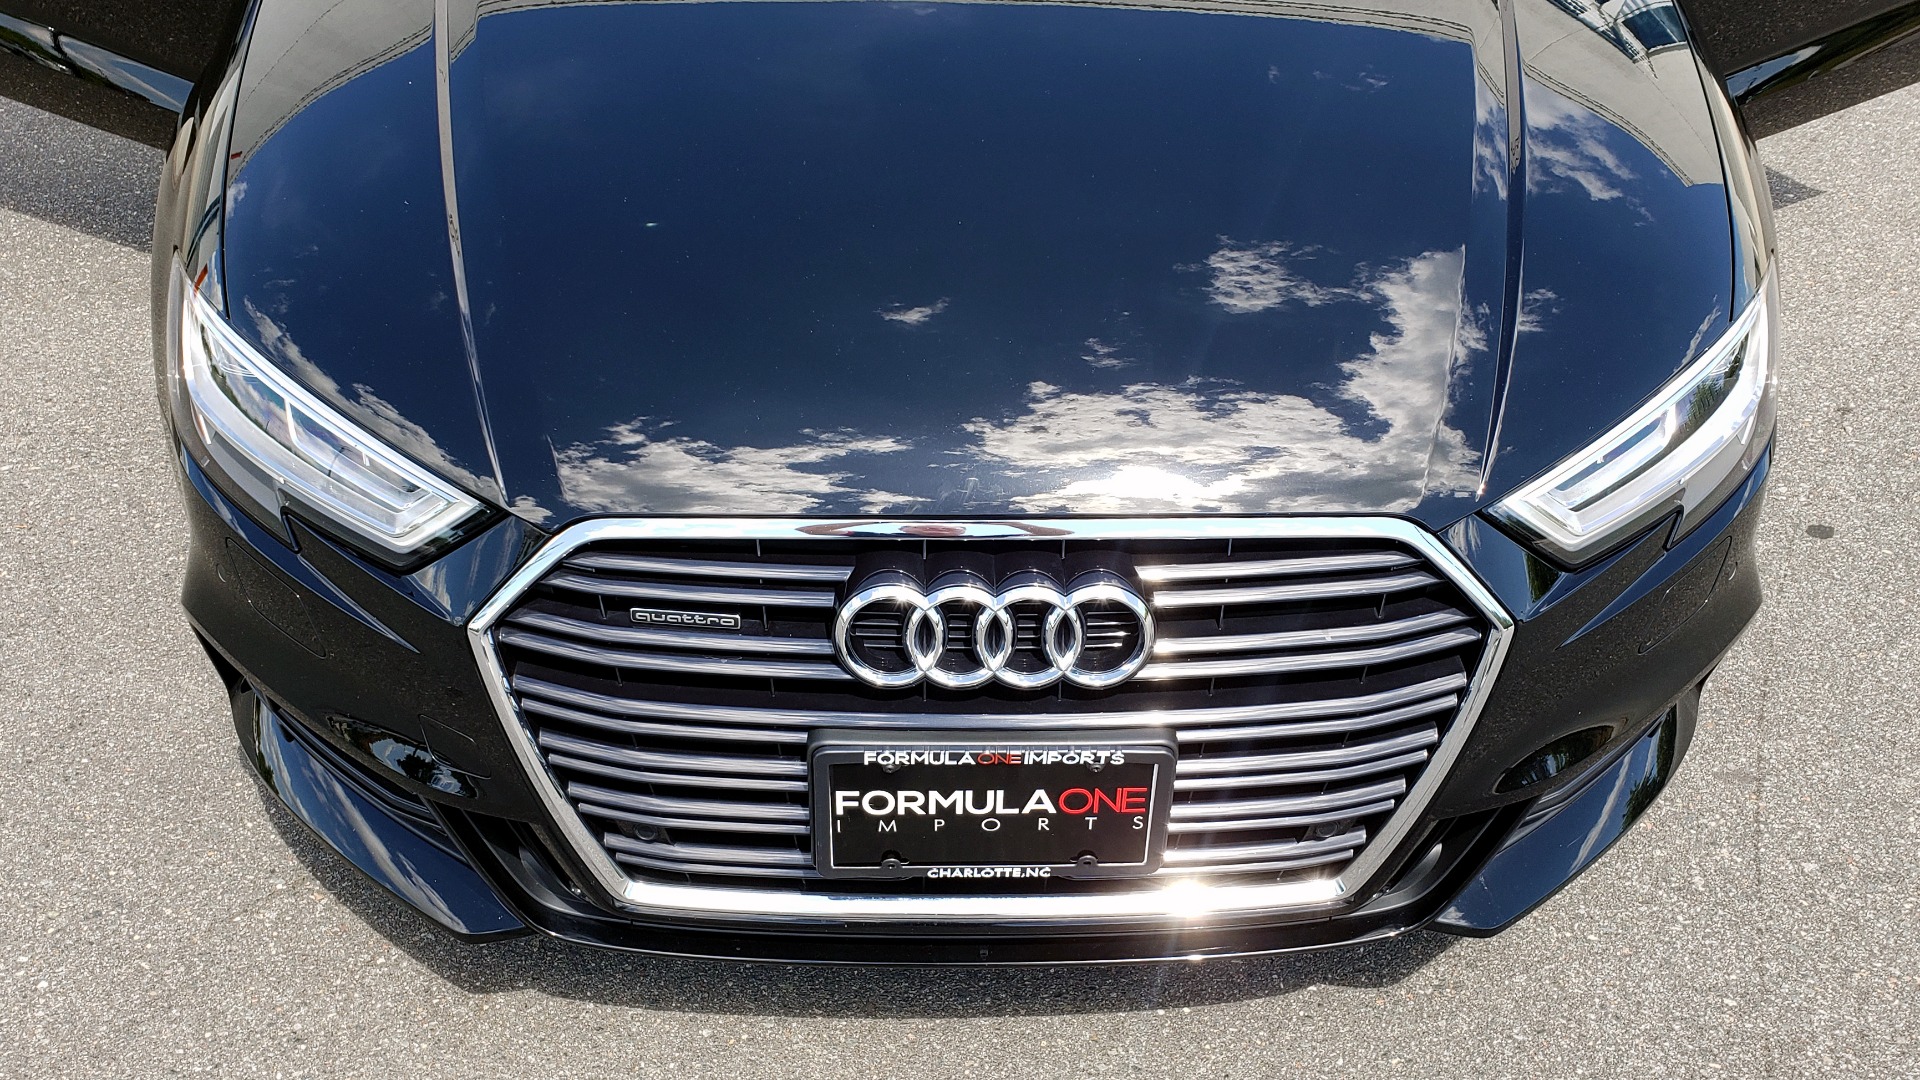 Used 2018 Audi A3 SEDAN PREMIUM PLUS / NAV / PANO-ROOF / B&O SND / LED PKG / REARVIEW for sale Sold at Formula Imports in Charlotte NC 28227 24